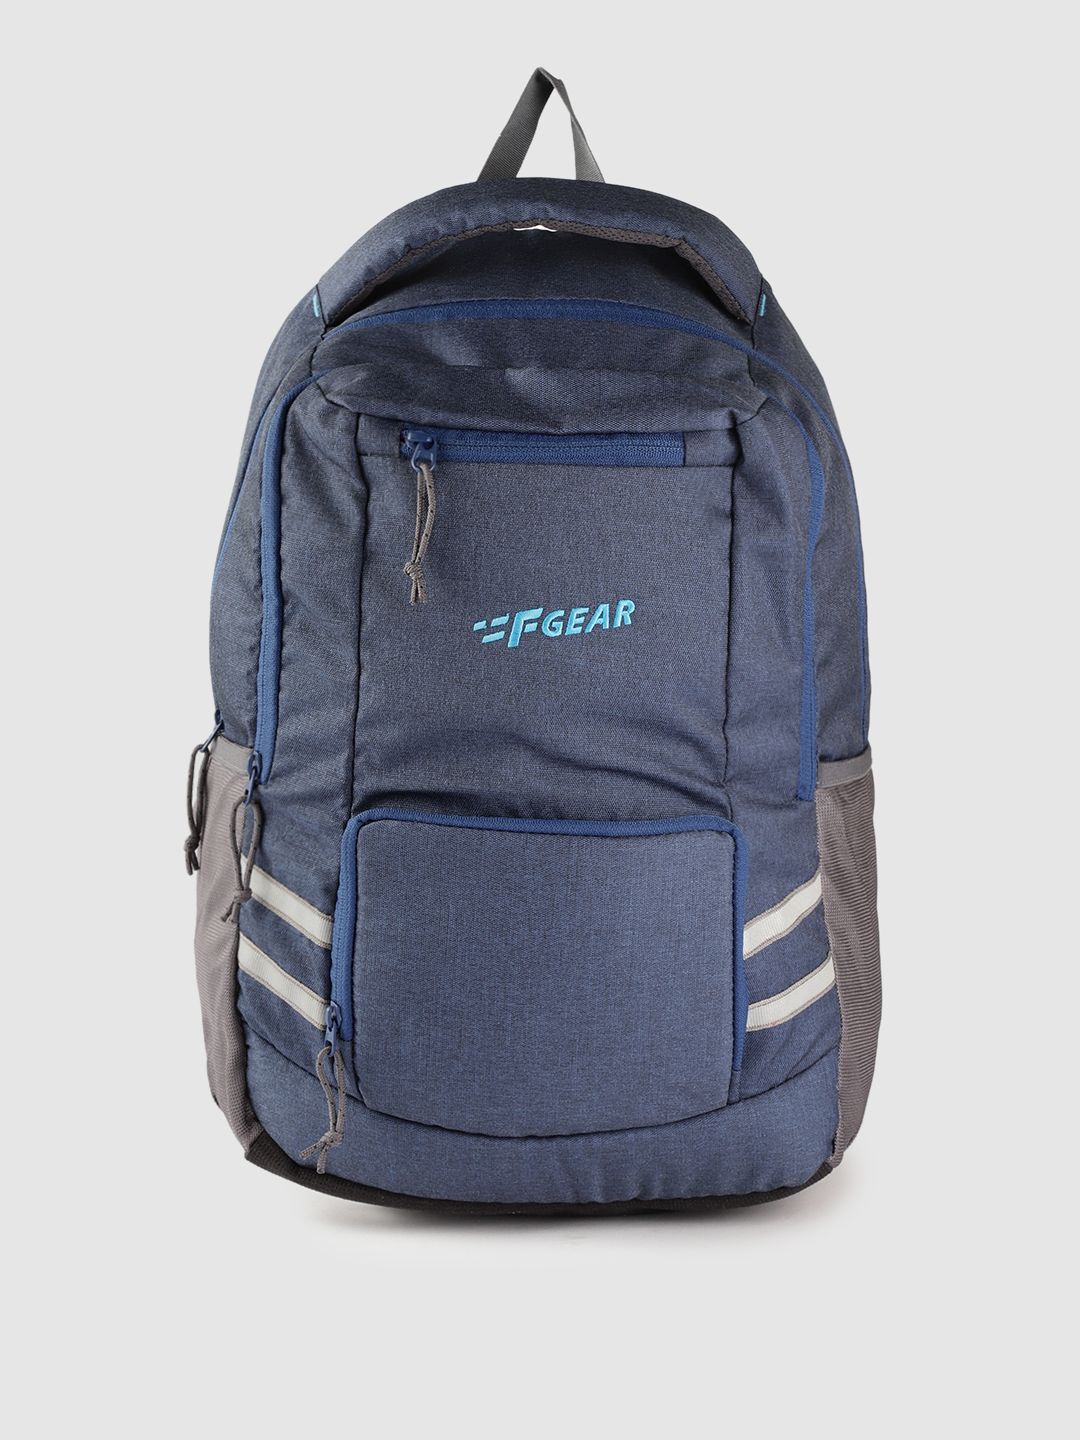 F Gear Unisex Blue Solid Laptop Backpack with Rain Cover Price in India